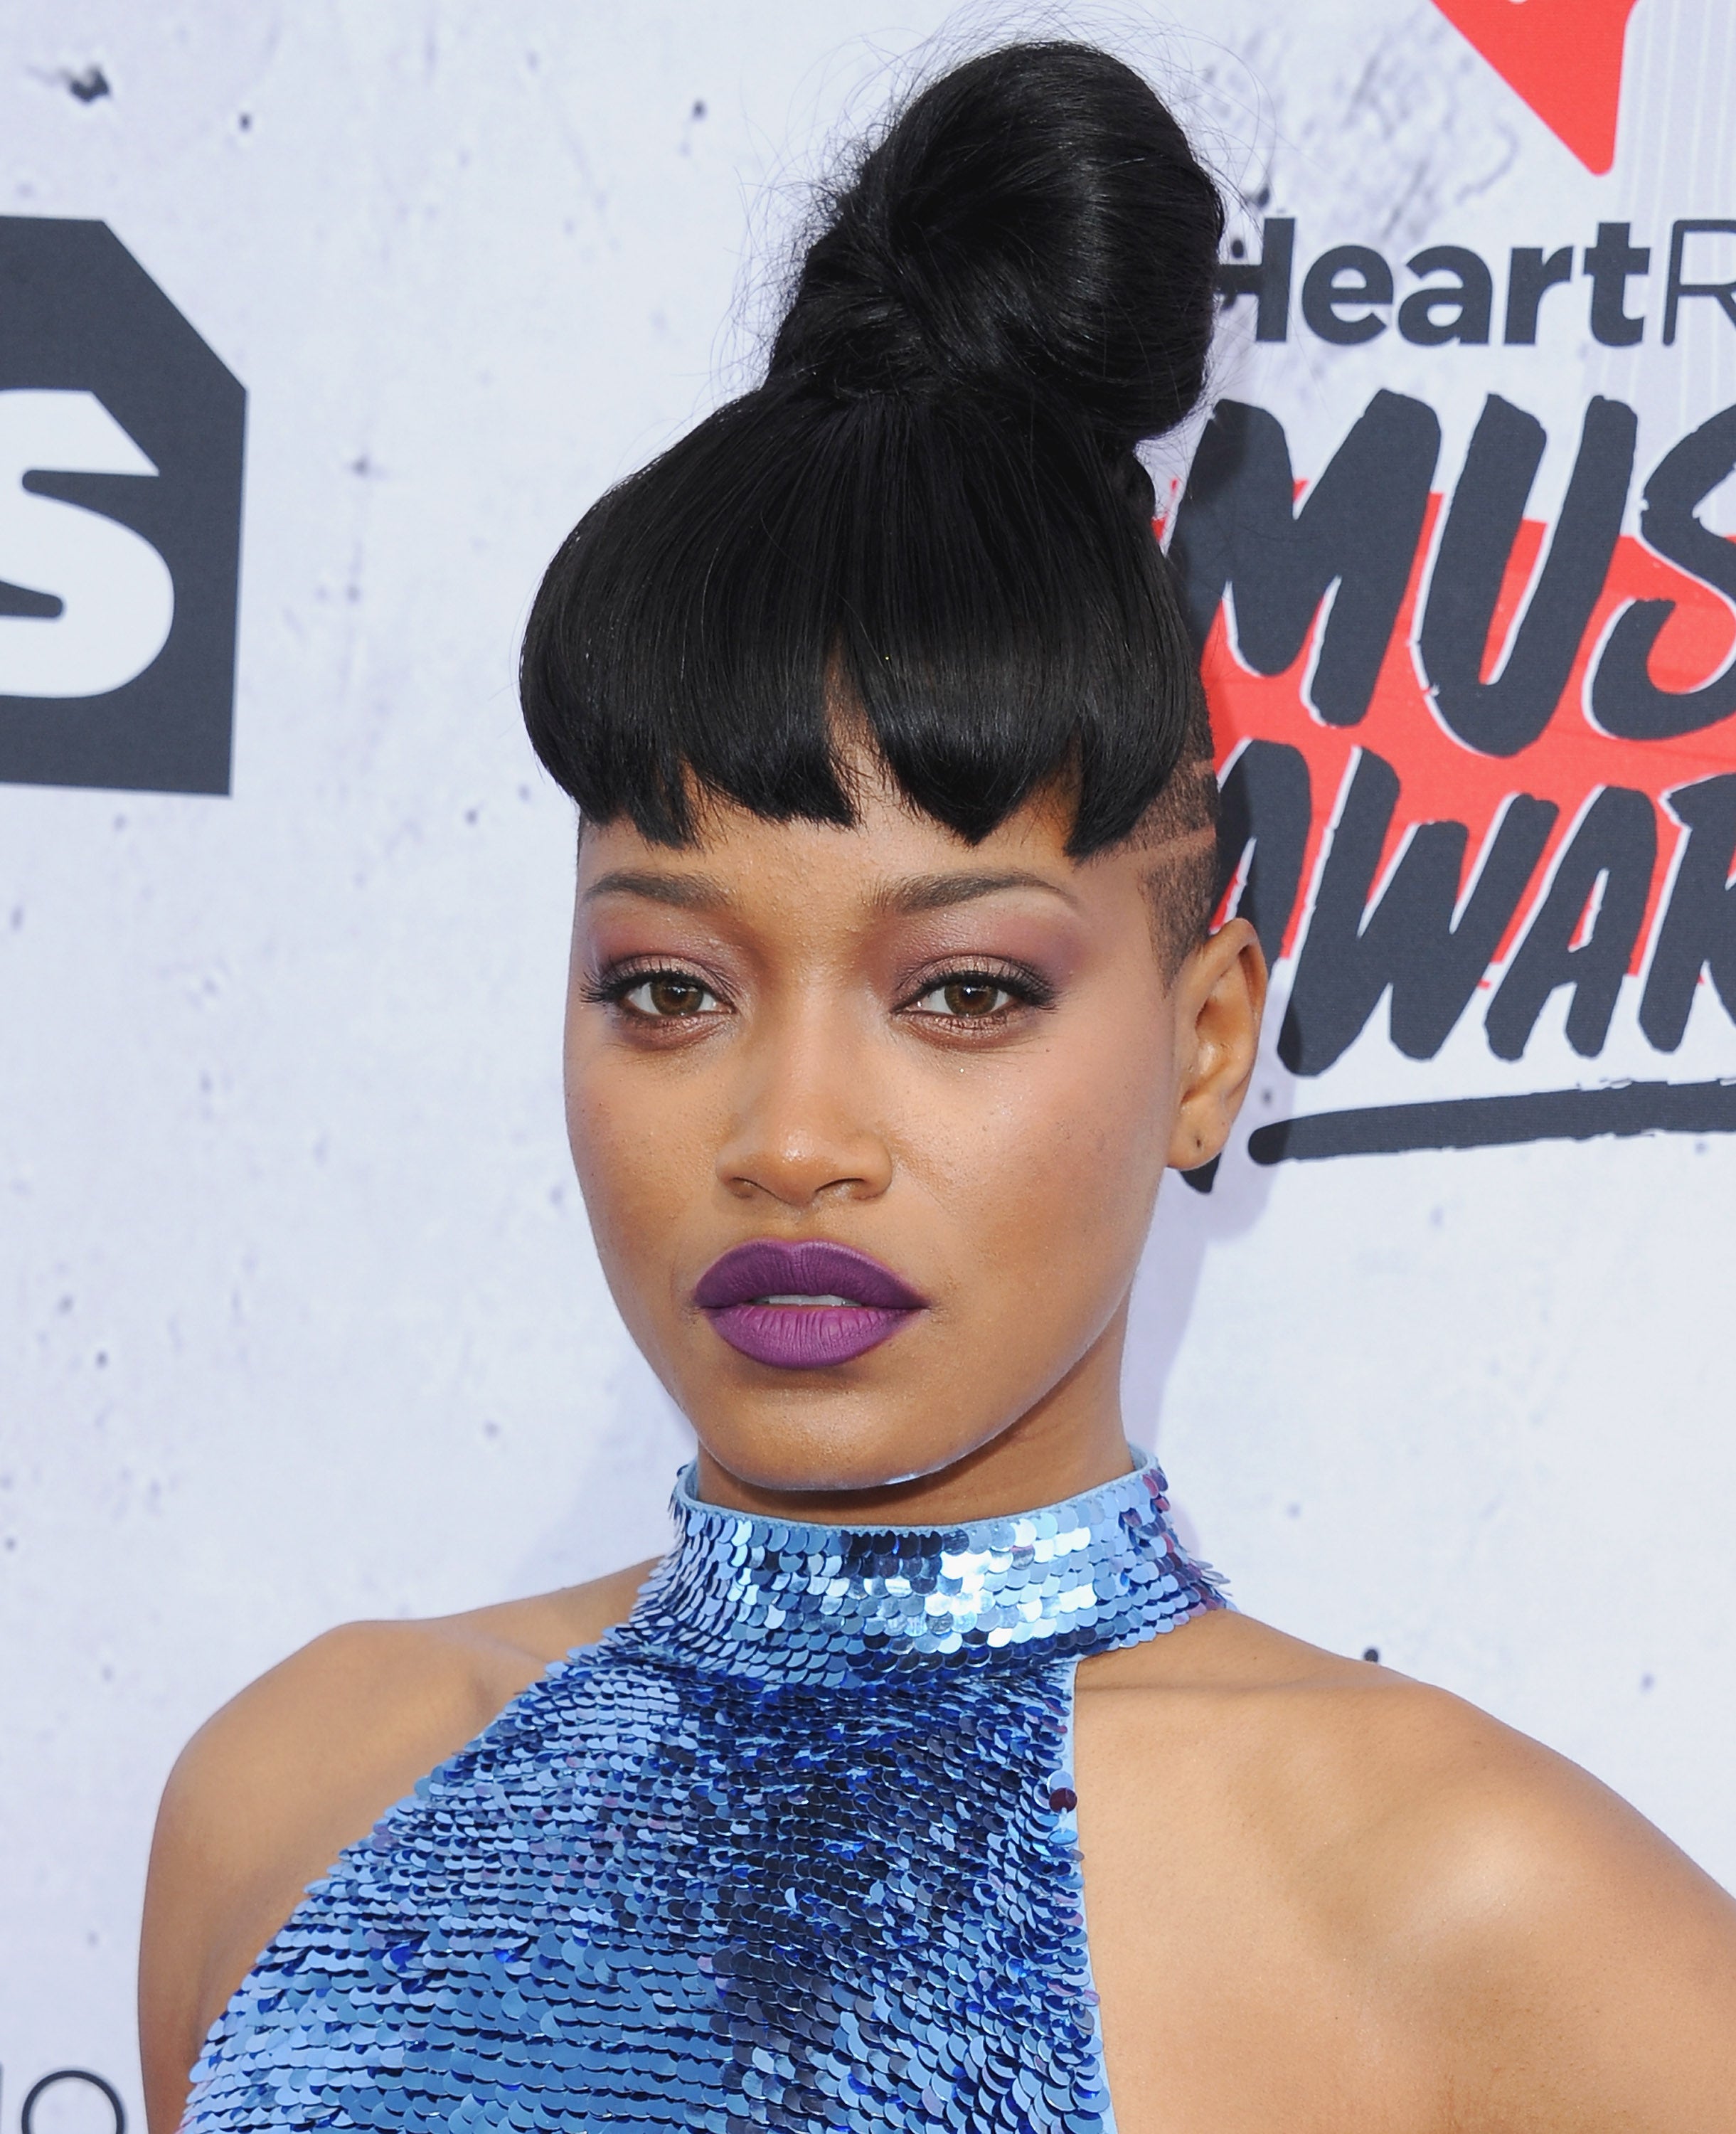 8 Hairstyles From The iHeartRadio Awards You Should Copy Now